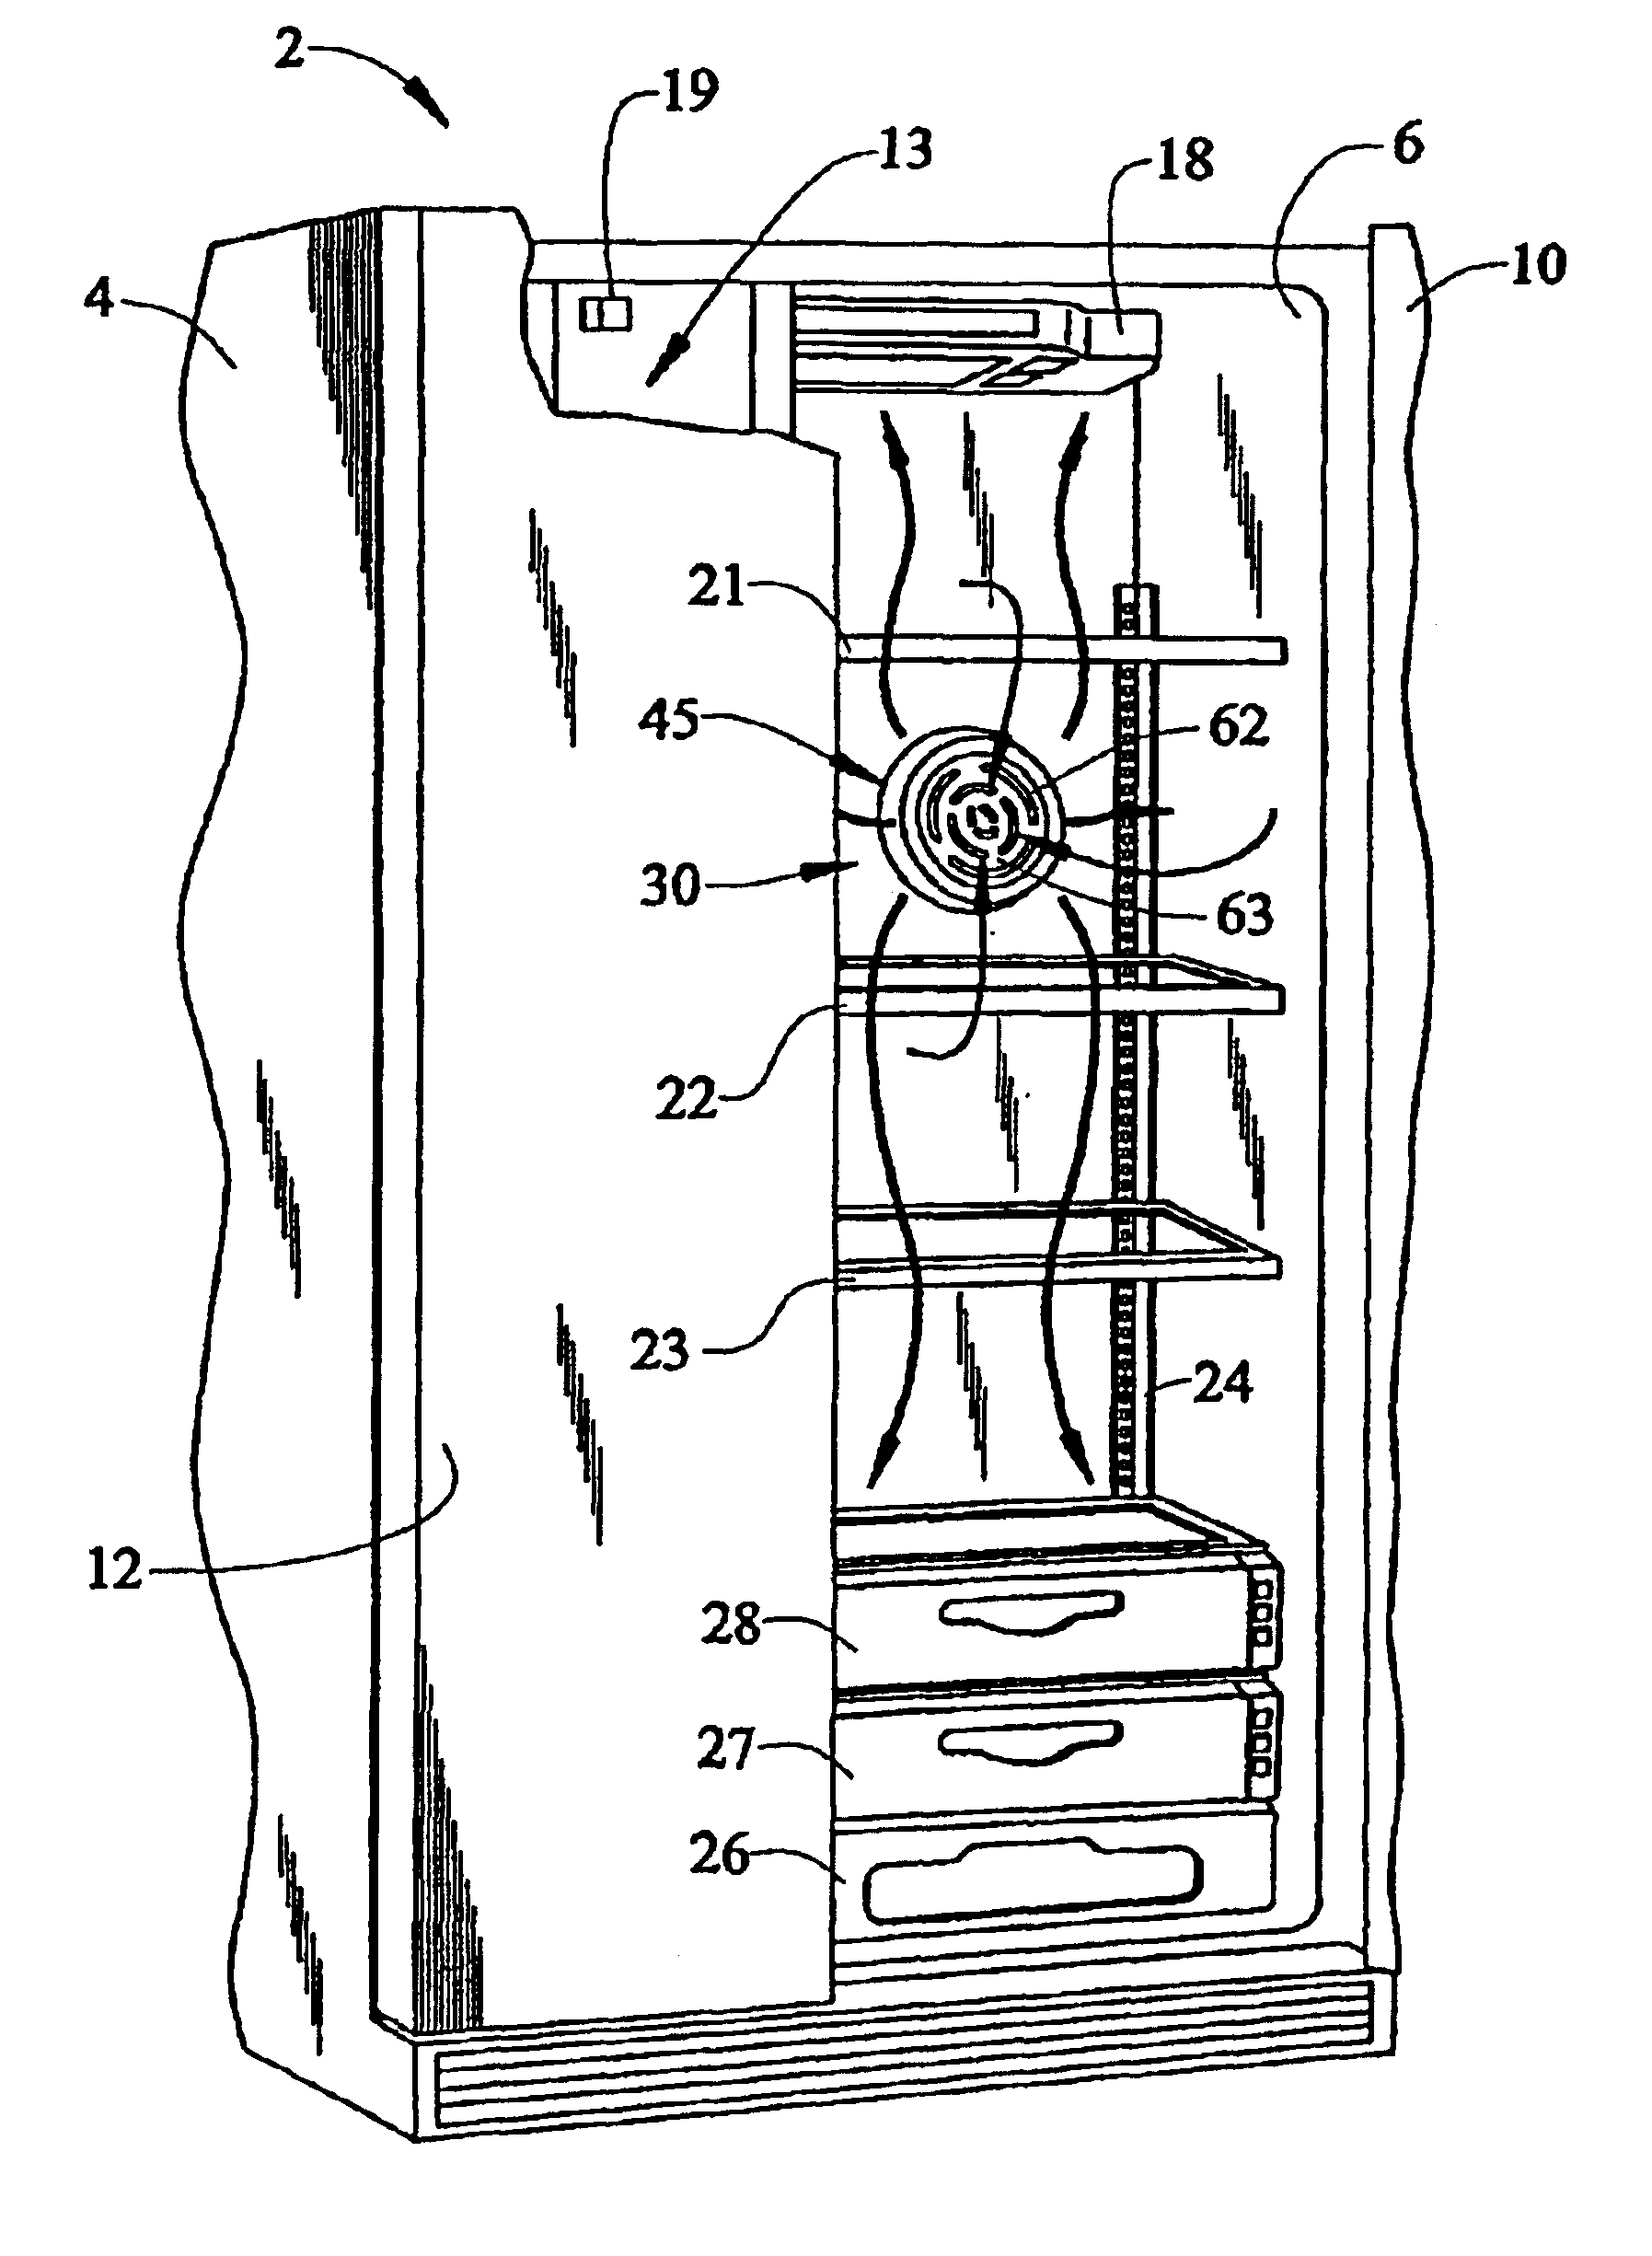 Air circulation and filtration system for a refrigerator